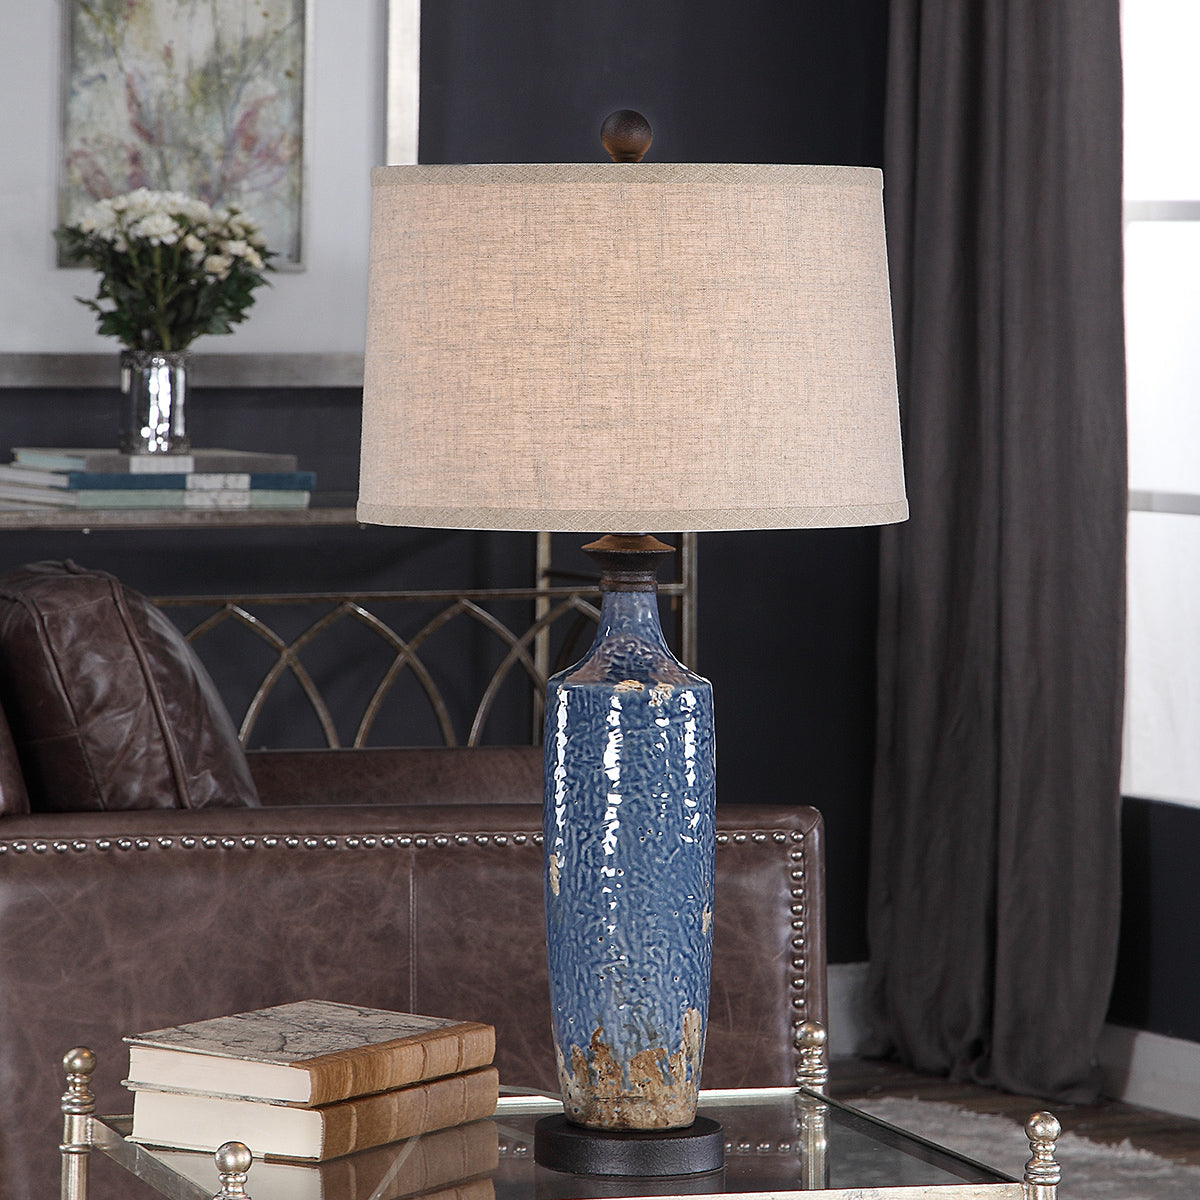 Decor Market Table Lamp With Textured Ceramic Base - Blue